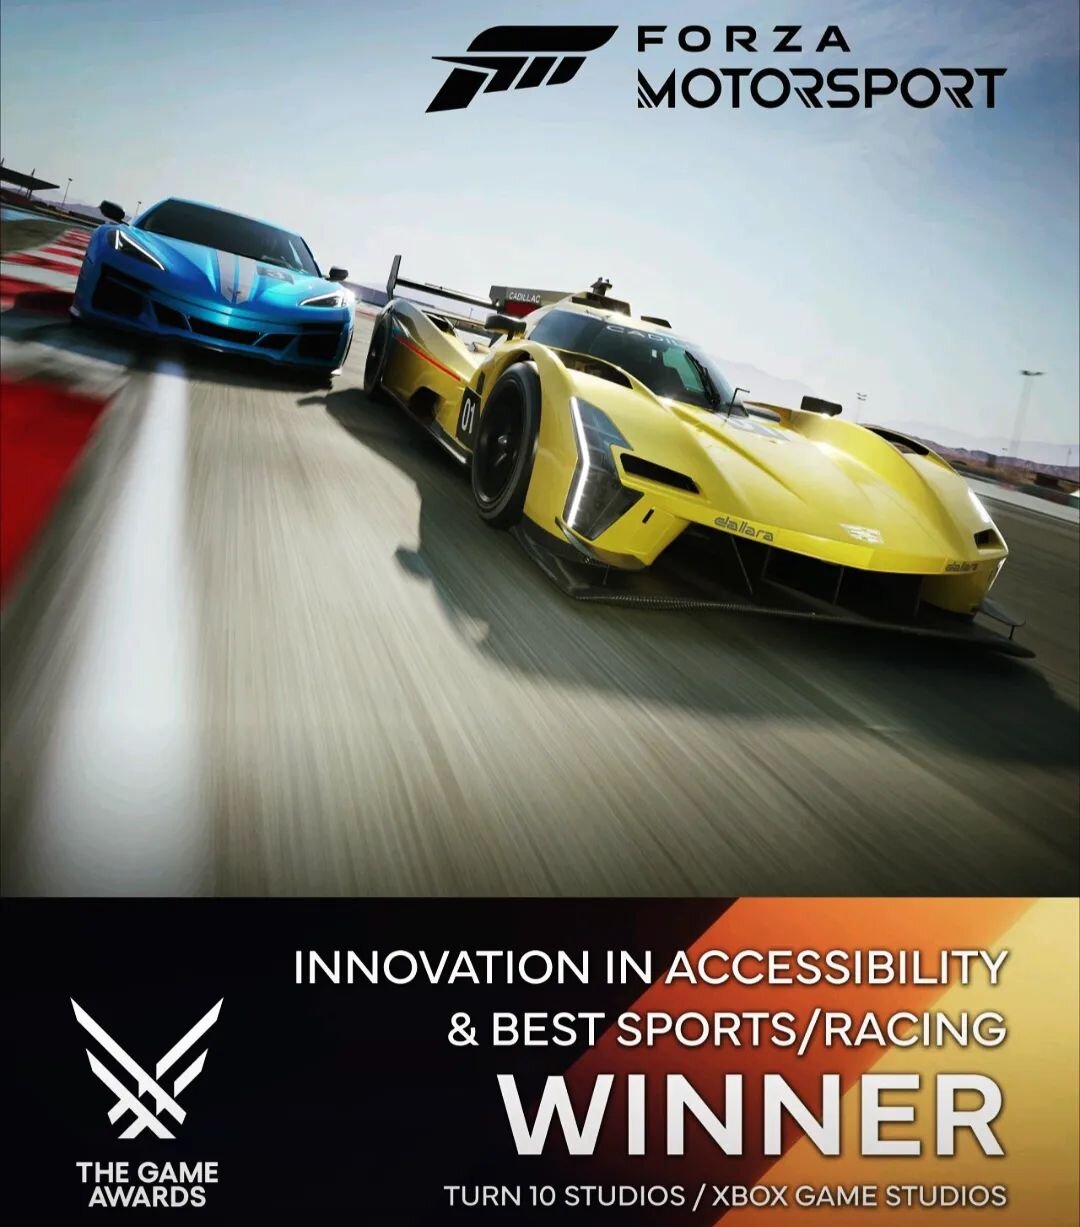 🏆 Best Sports/Racing Game⁣
🏆 Innovation in Accessibility⁣
⁣
Congrats to everyone at Turn 10 Studios on @forzamotorsport and especially to the Audio Team for their dedication to Blind Driving Assist.⁣
⁣
We did it! 🏎️🎉⁣
⁣

@thegameawards
#Accessibi